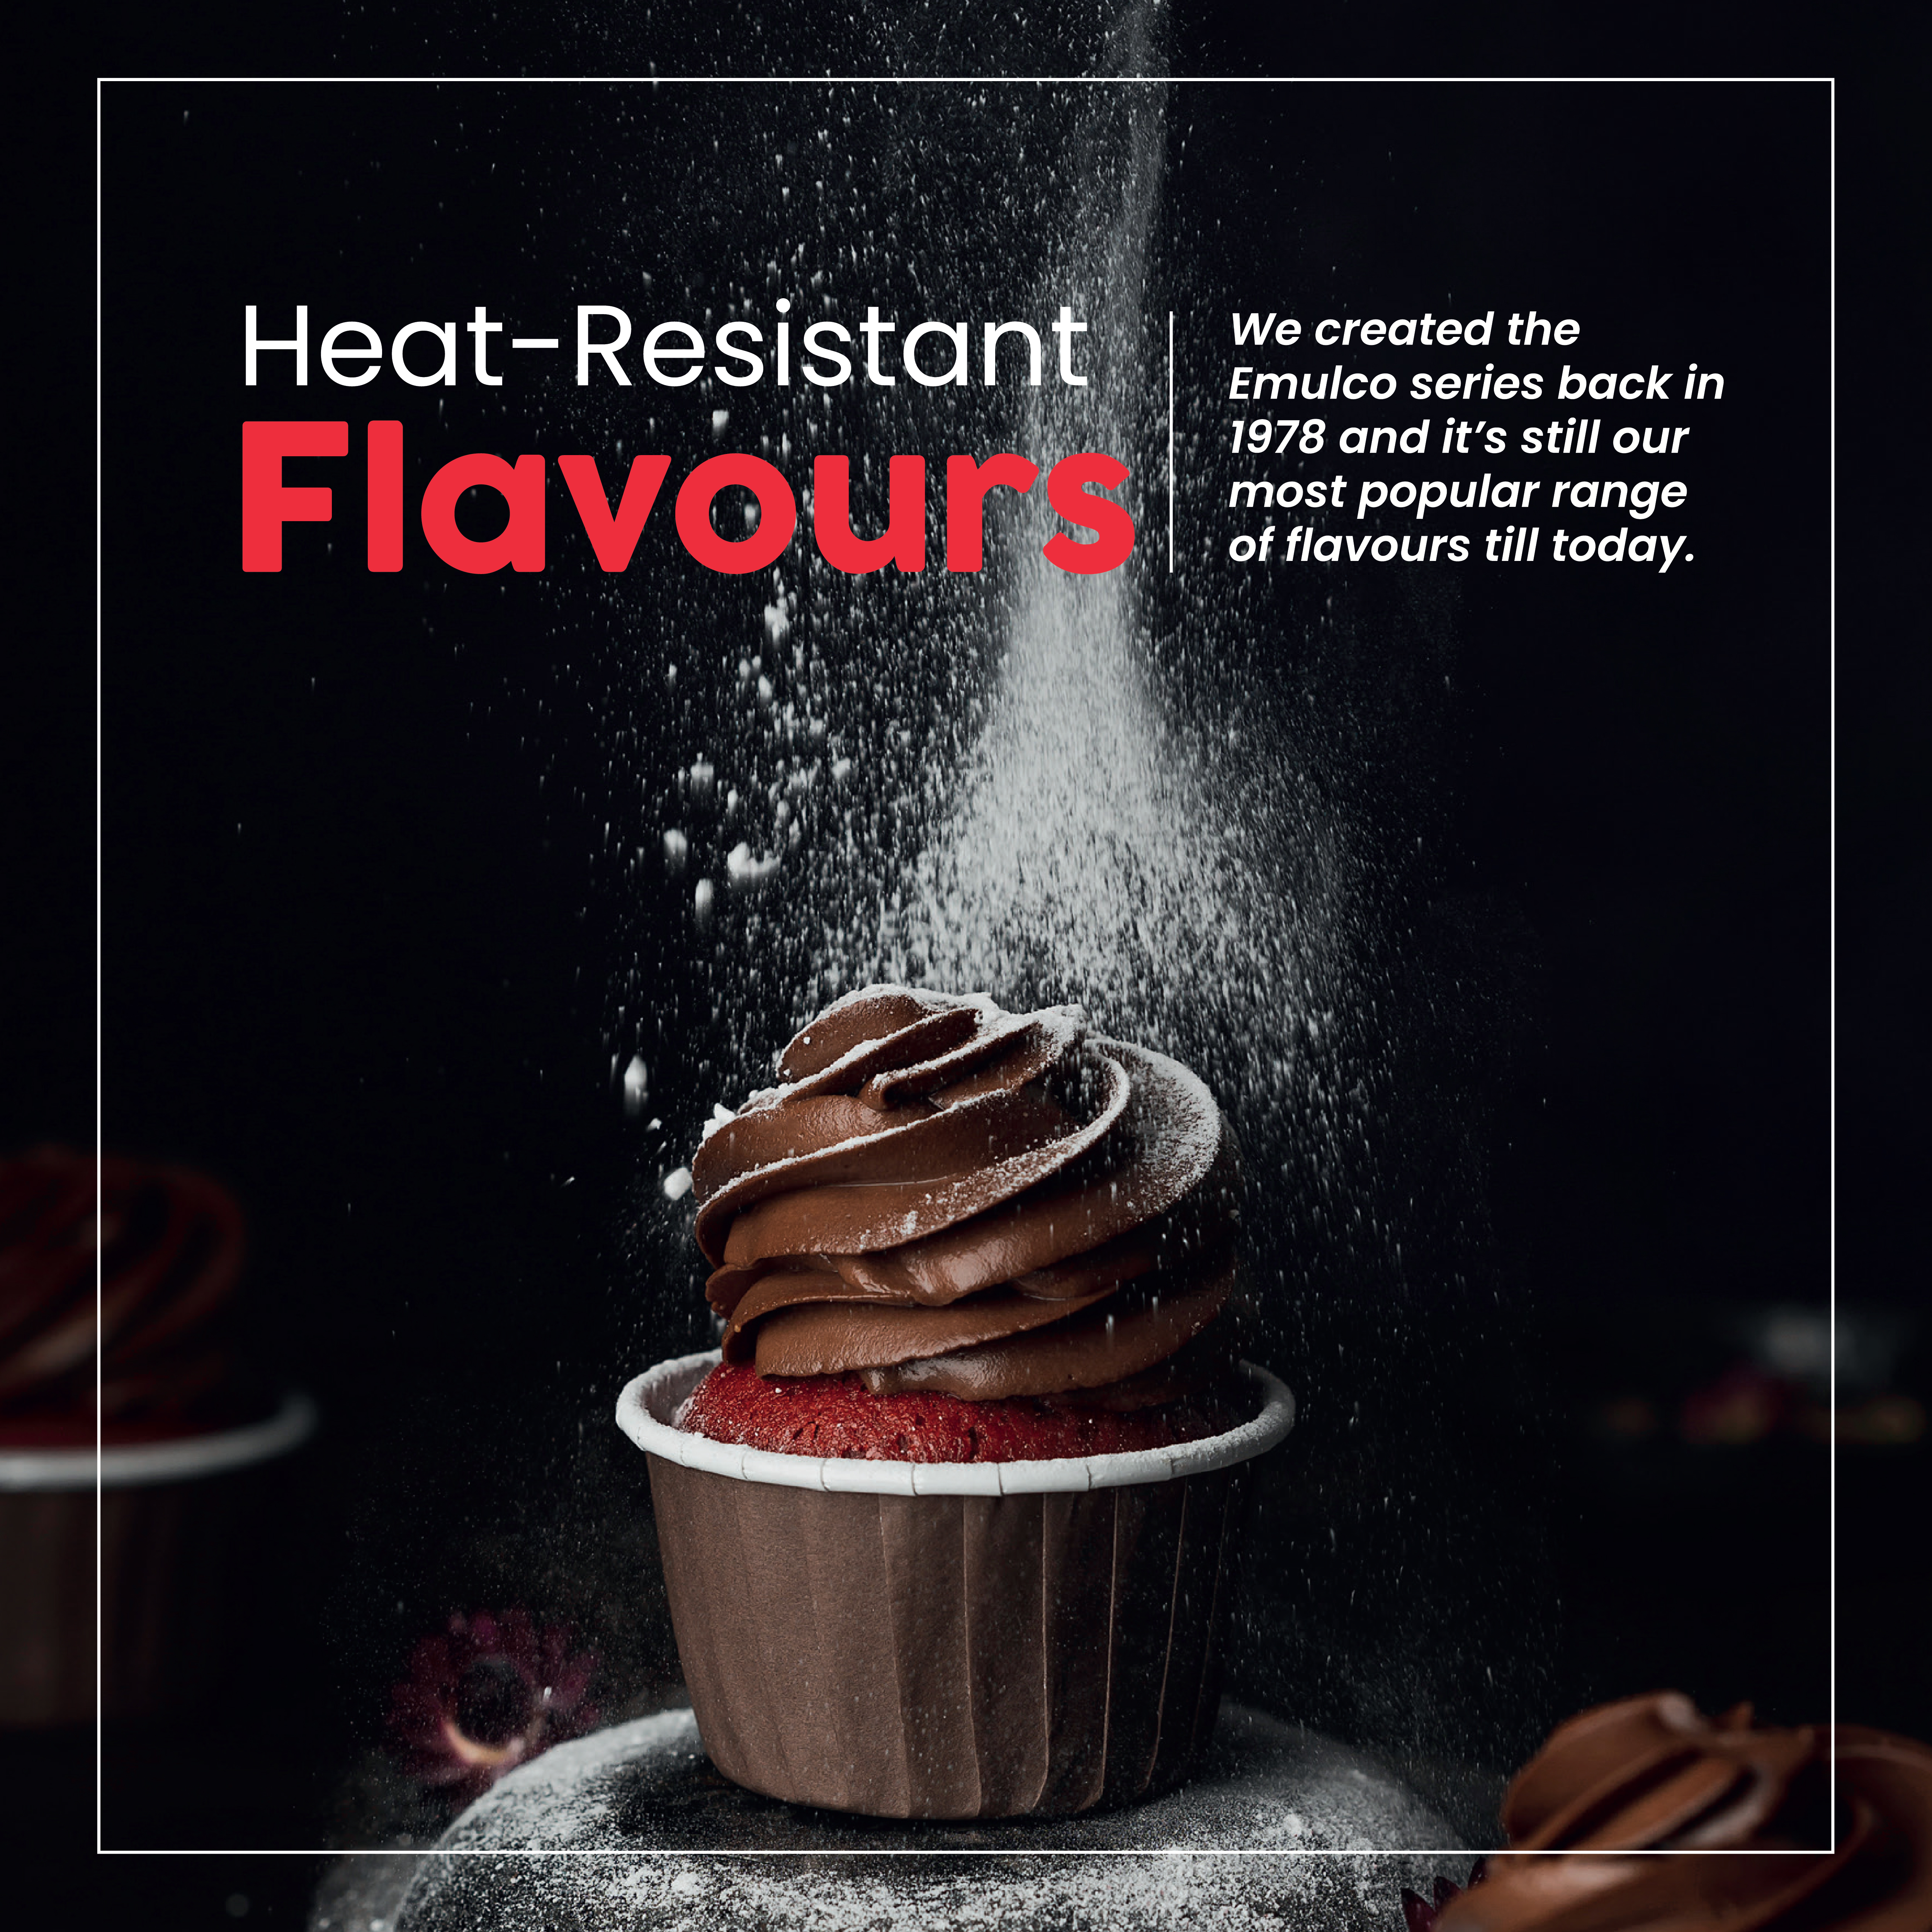 Hot out of the oven | Emulco Flavour Reimagination